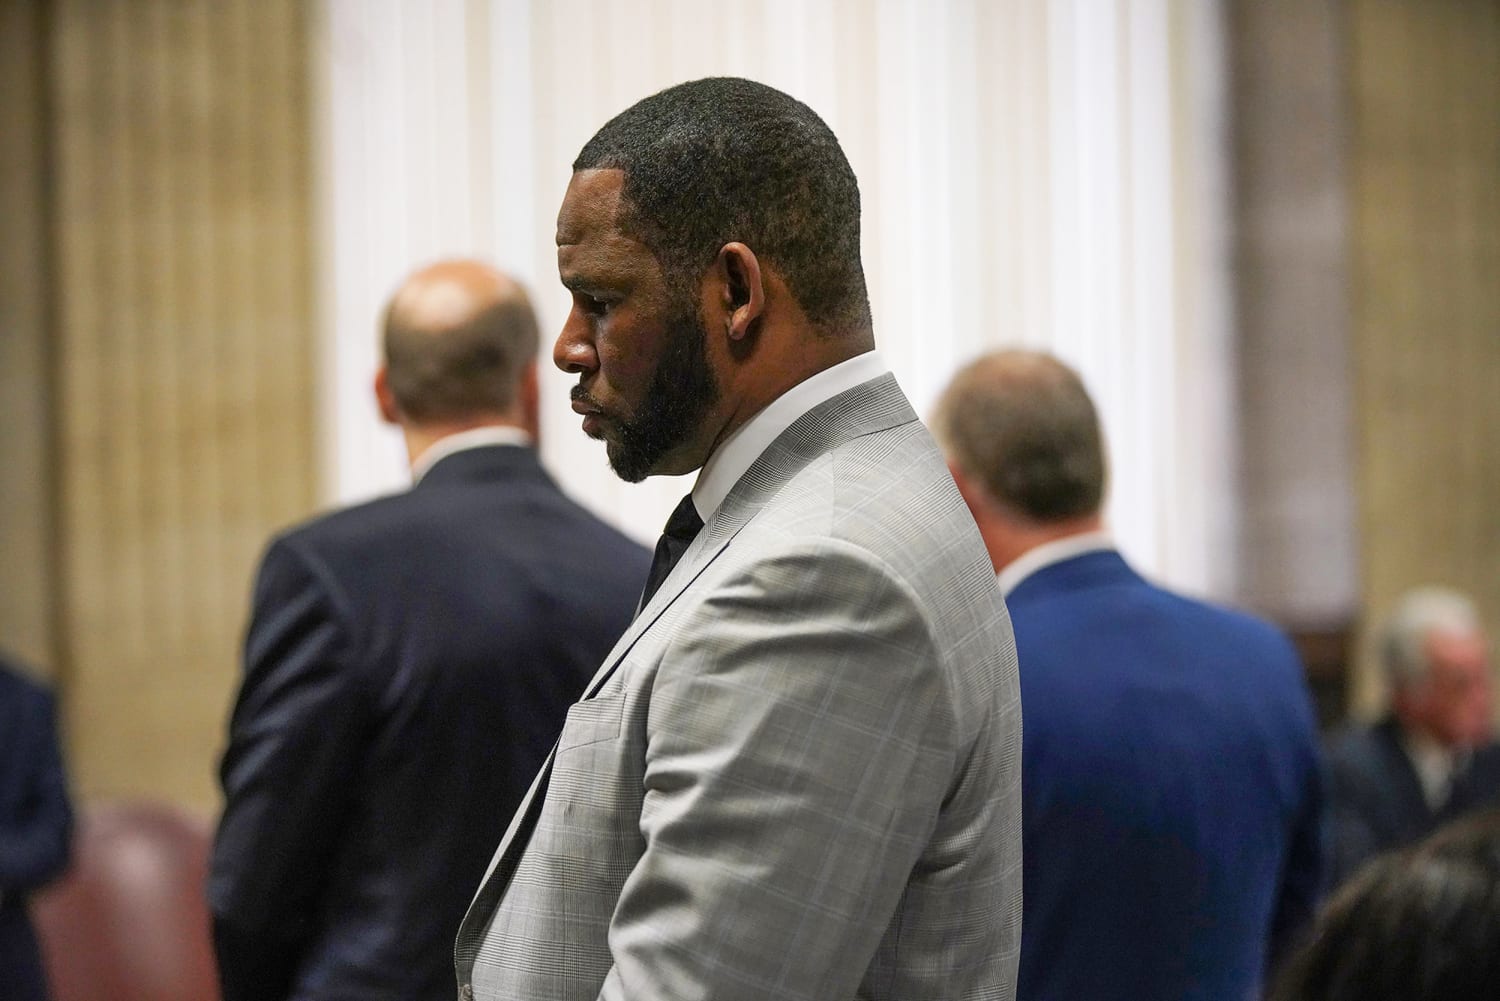 R. Kelly sexually assaulted minors and paid witnesses to cover up evidence, prosecutors say as his trial begins